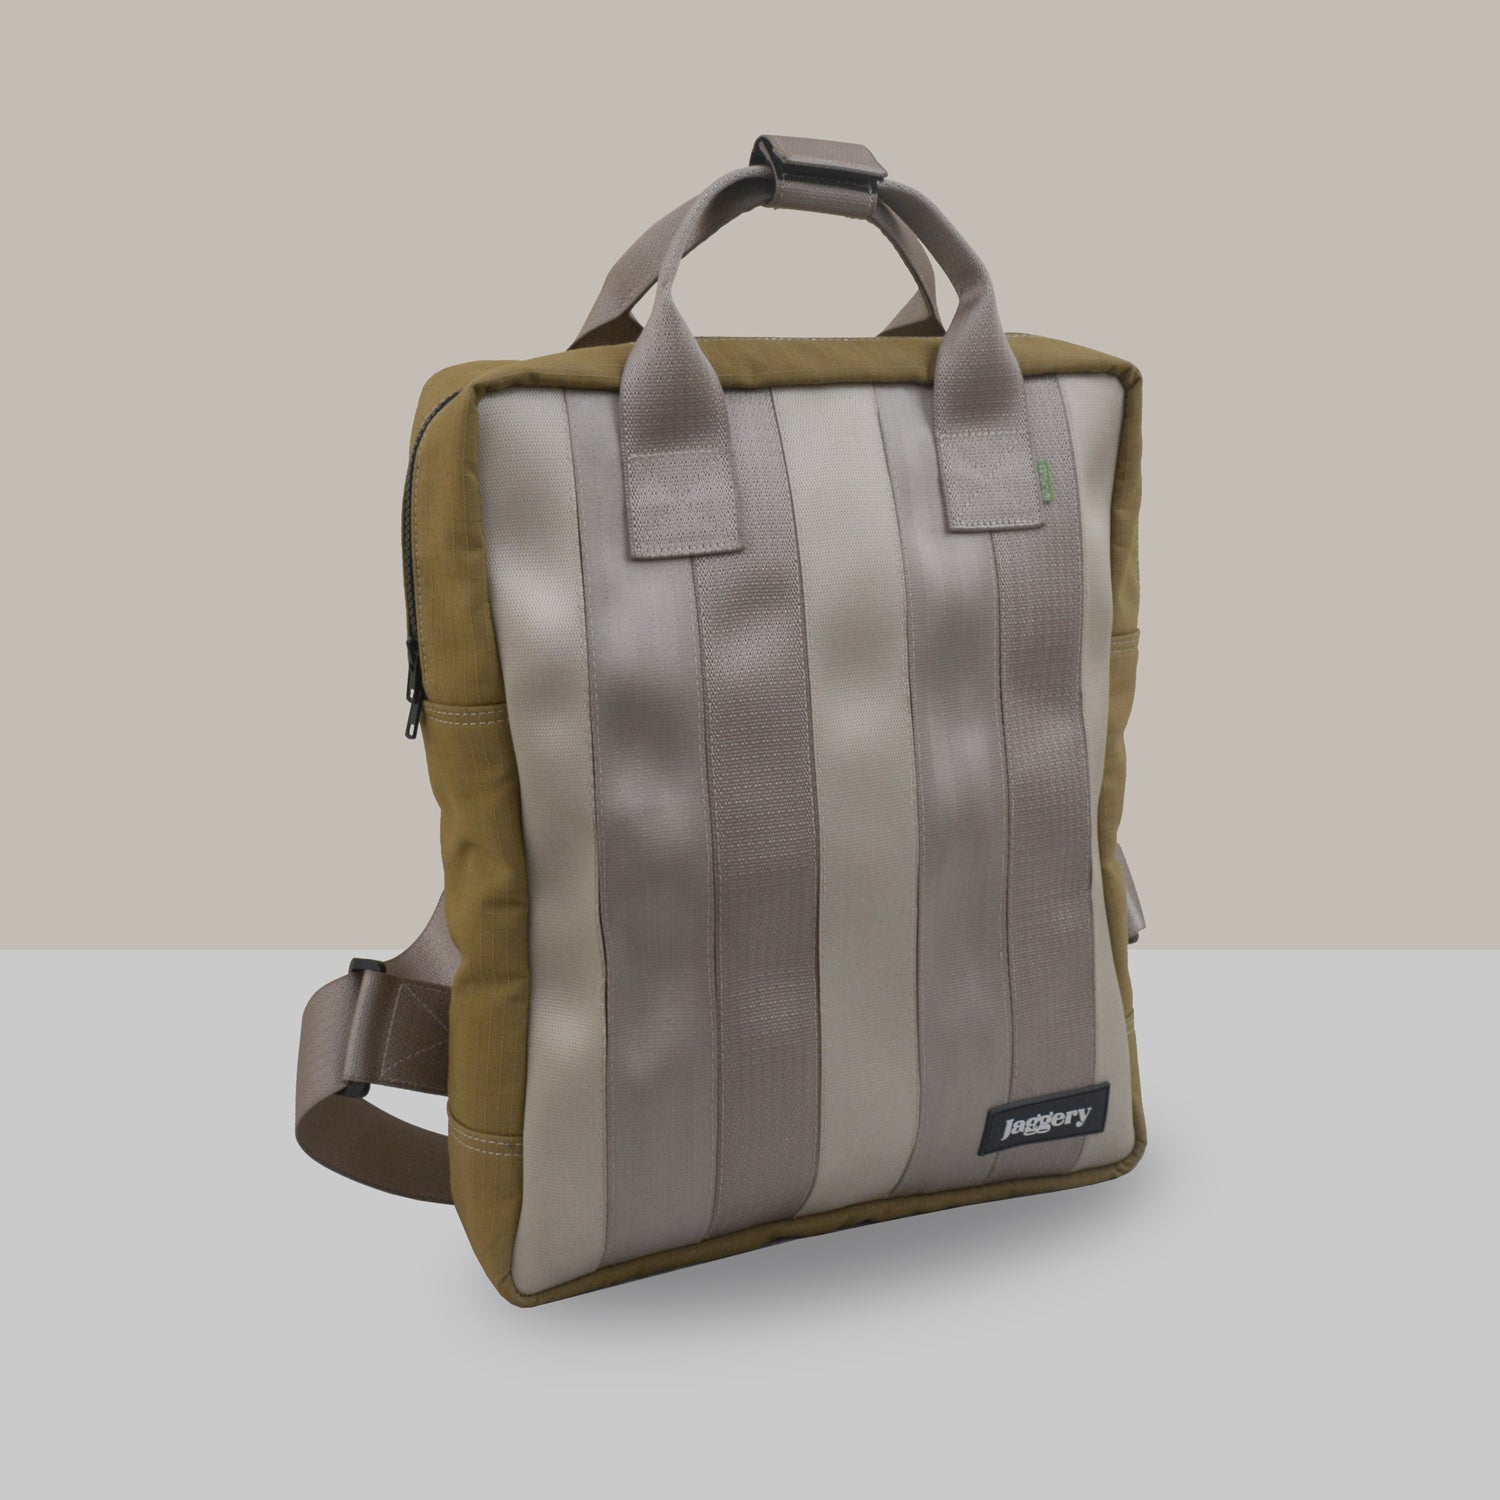 Arrive Upcycled Backpack in Beige Car Seat Belts and Khaki Canvas [15"laptop bag]